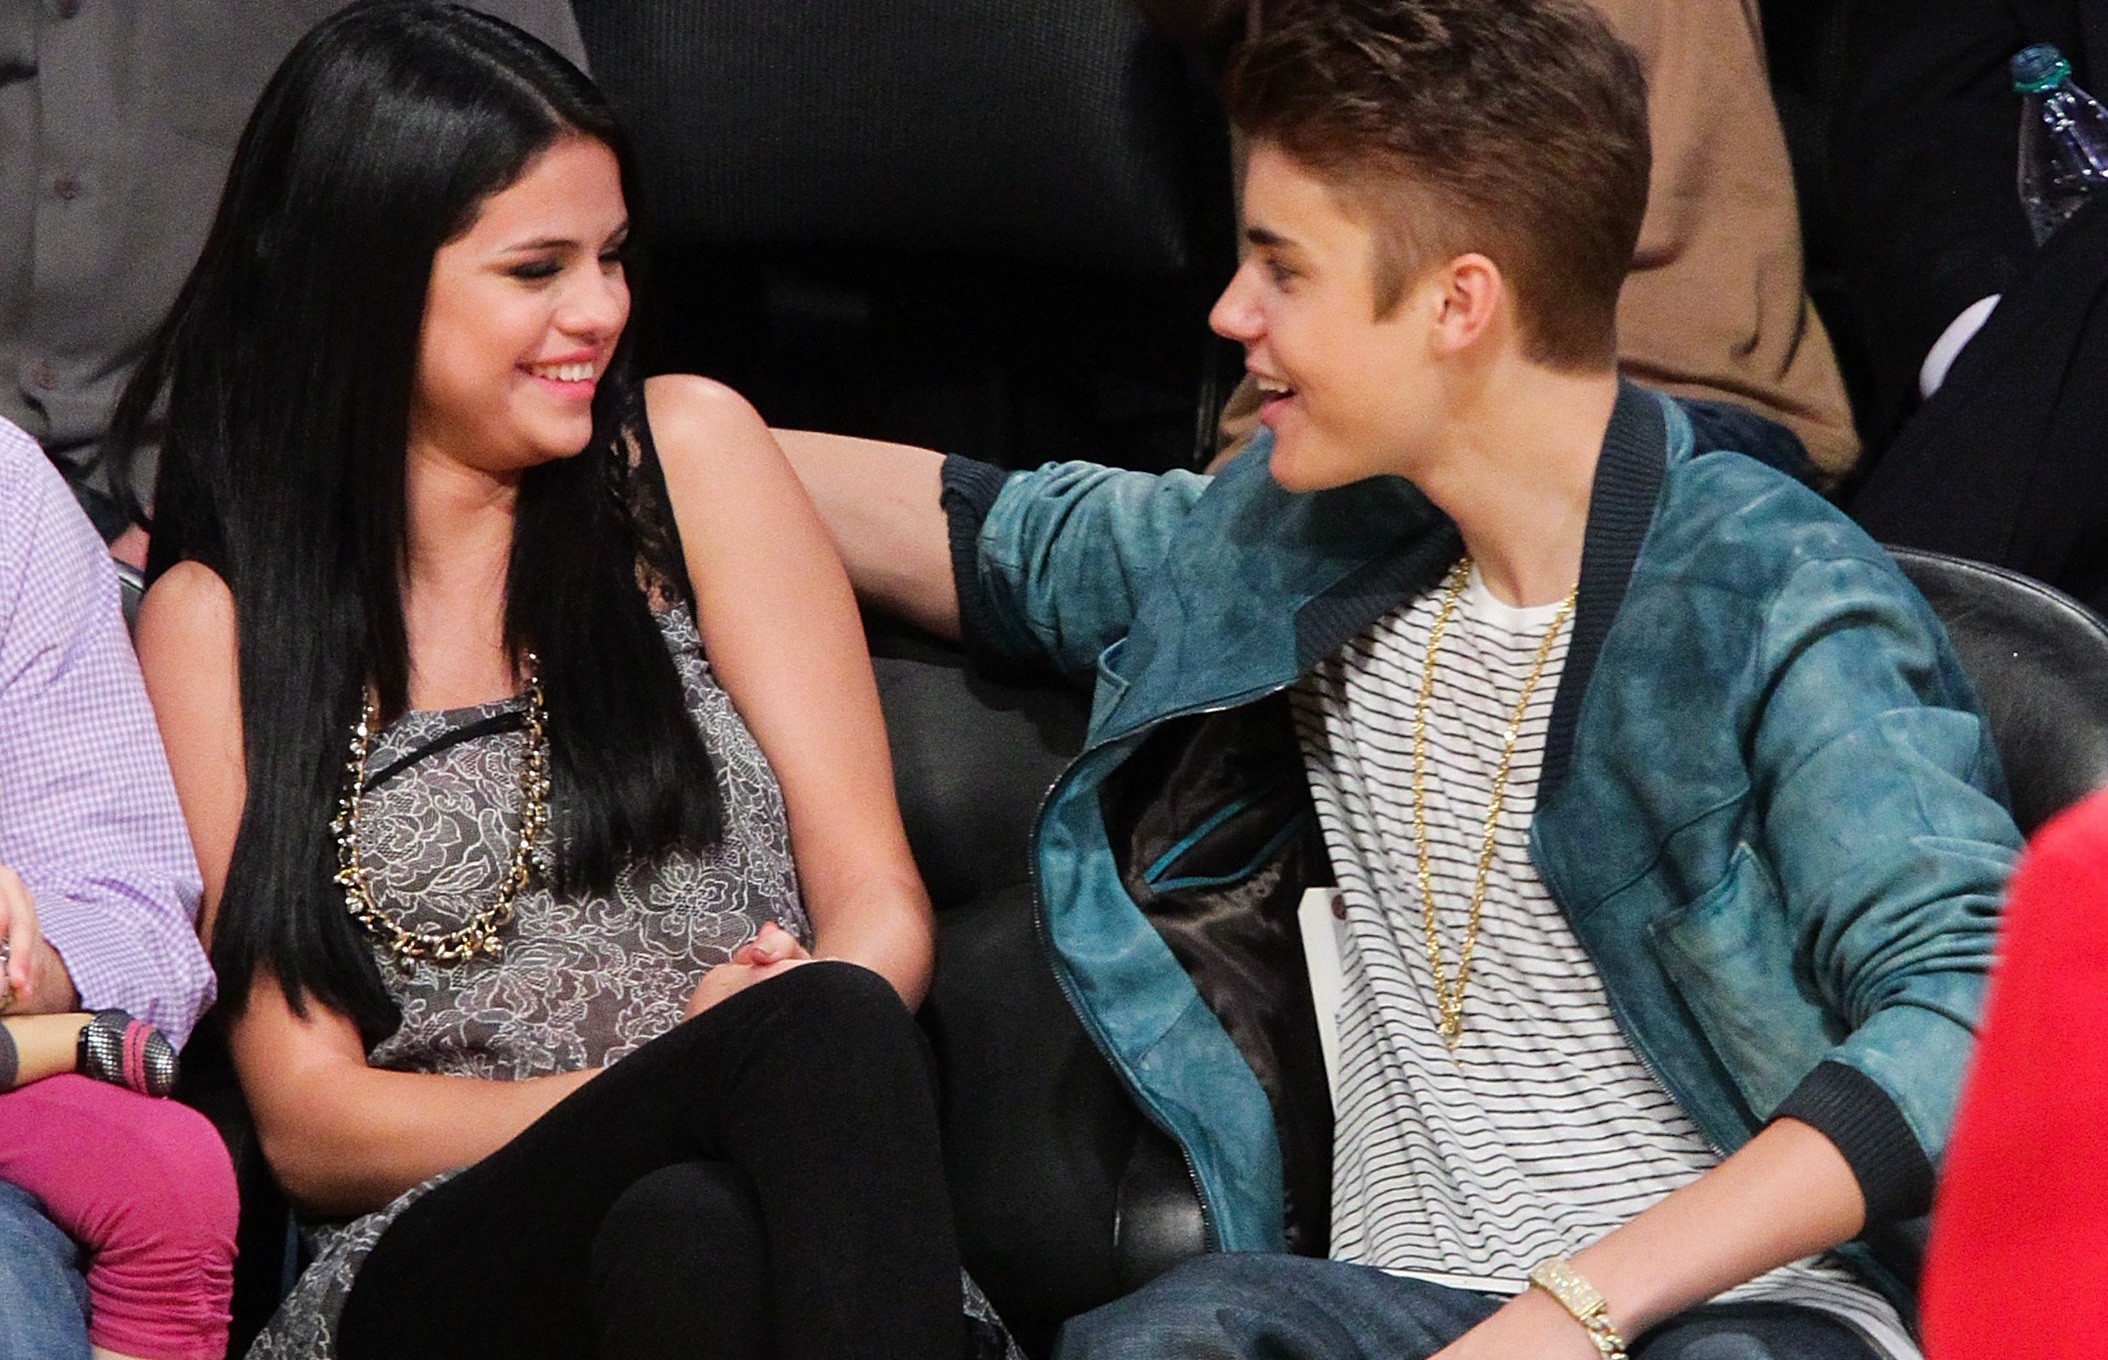 Lost Love photos of Justin Bieber and Selena Gomez so Cute